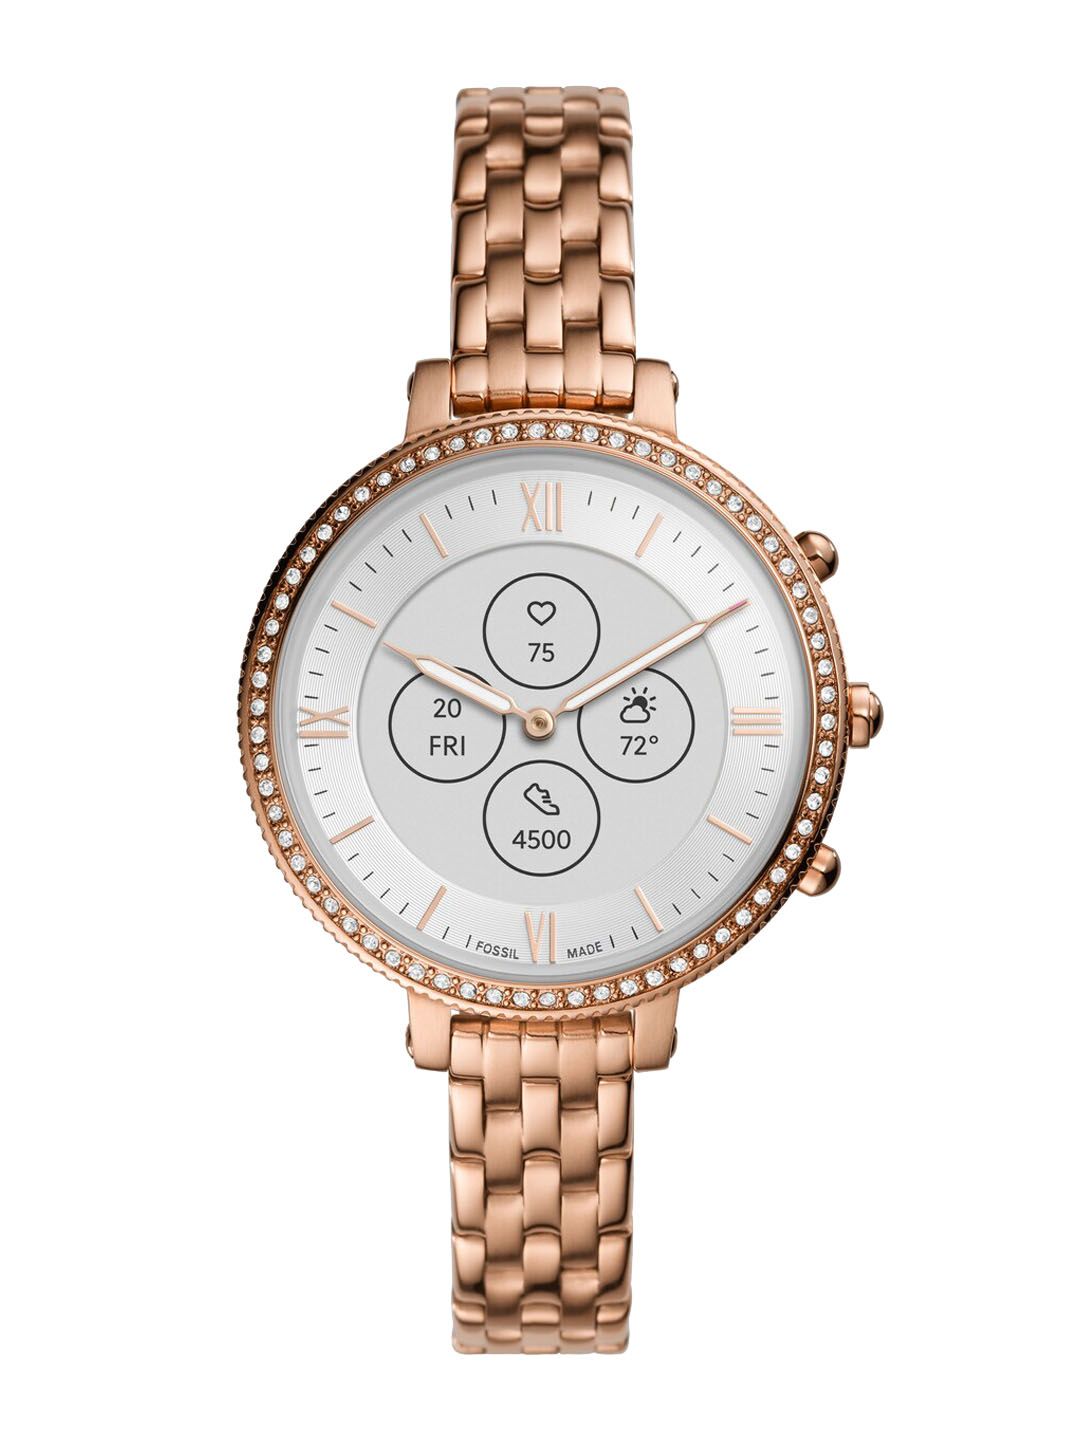 Fossil Women Rose Gold-Toned & White Solid Smart Watch FTW7037 Price in India